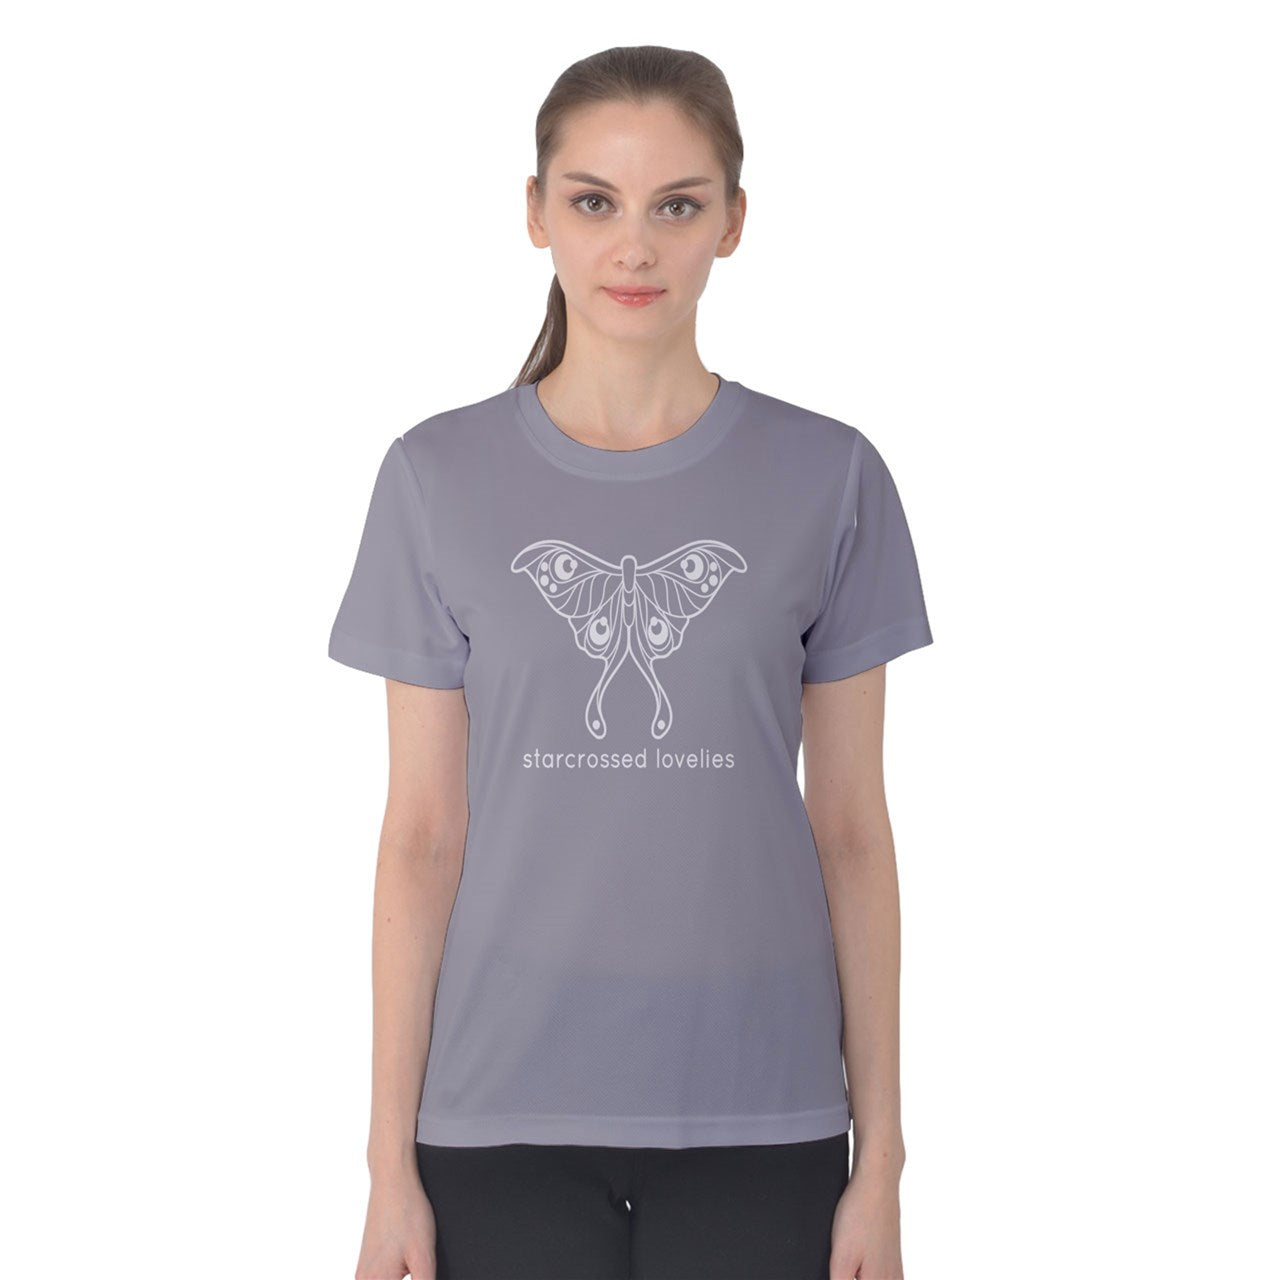 starcrossed lovelies T-shirt in Grey - Lolita Collective